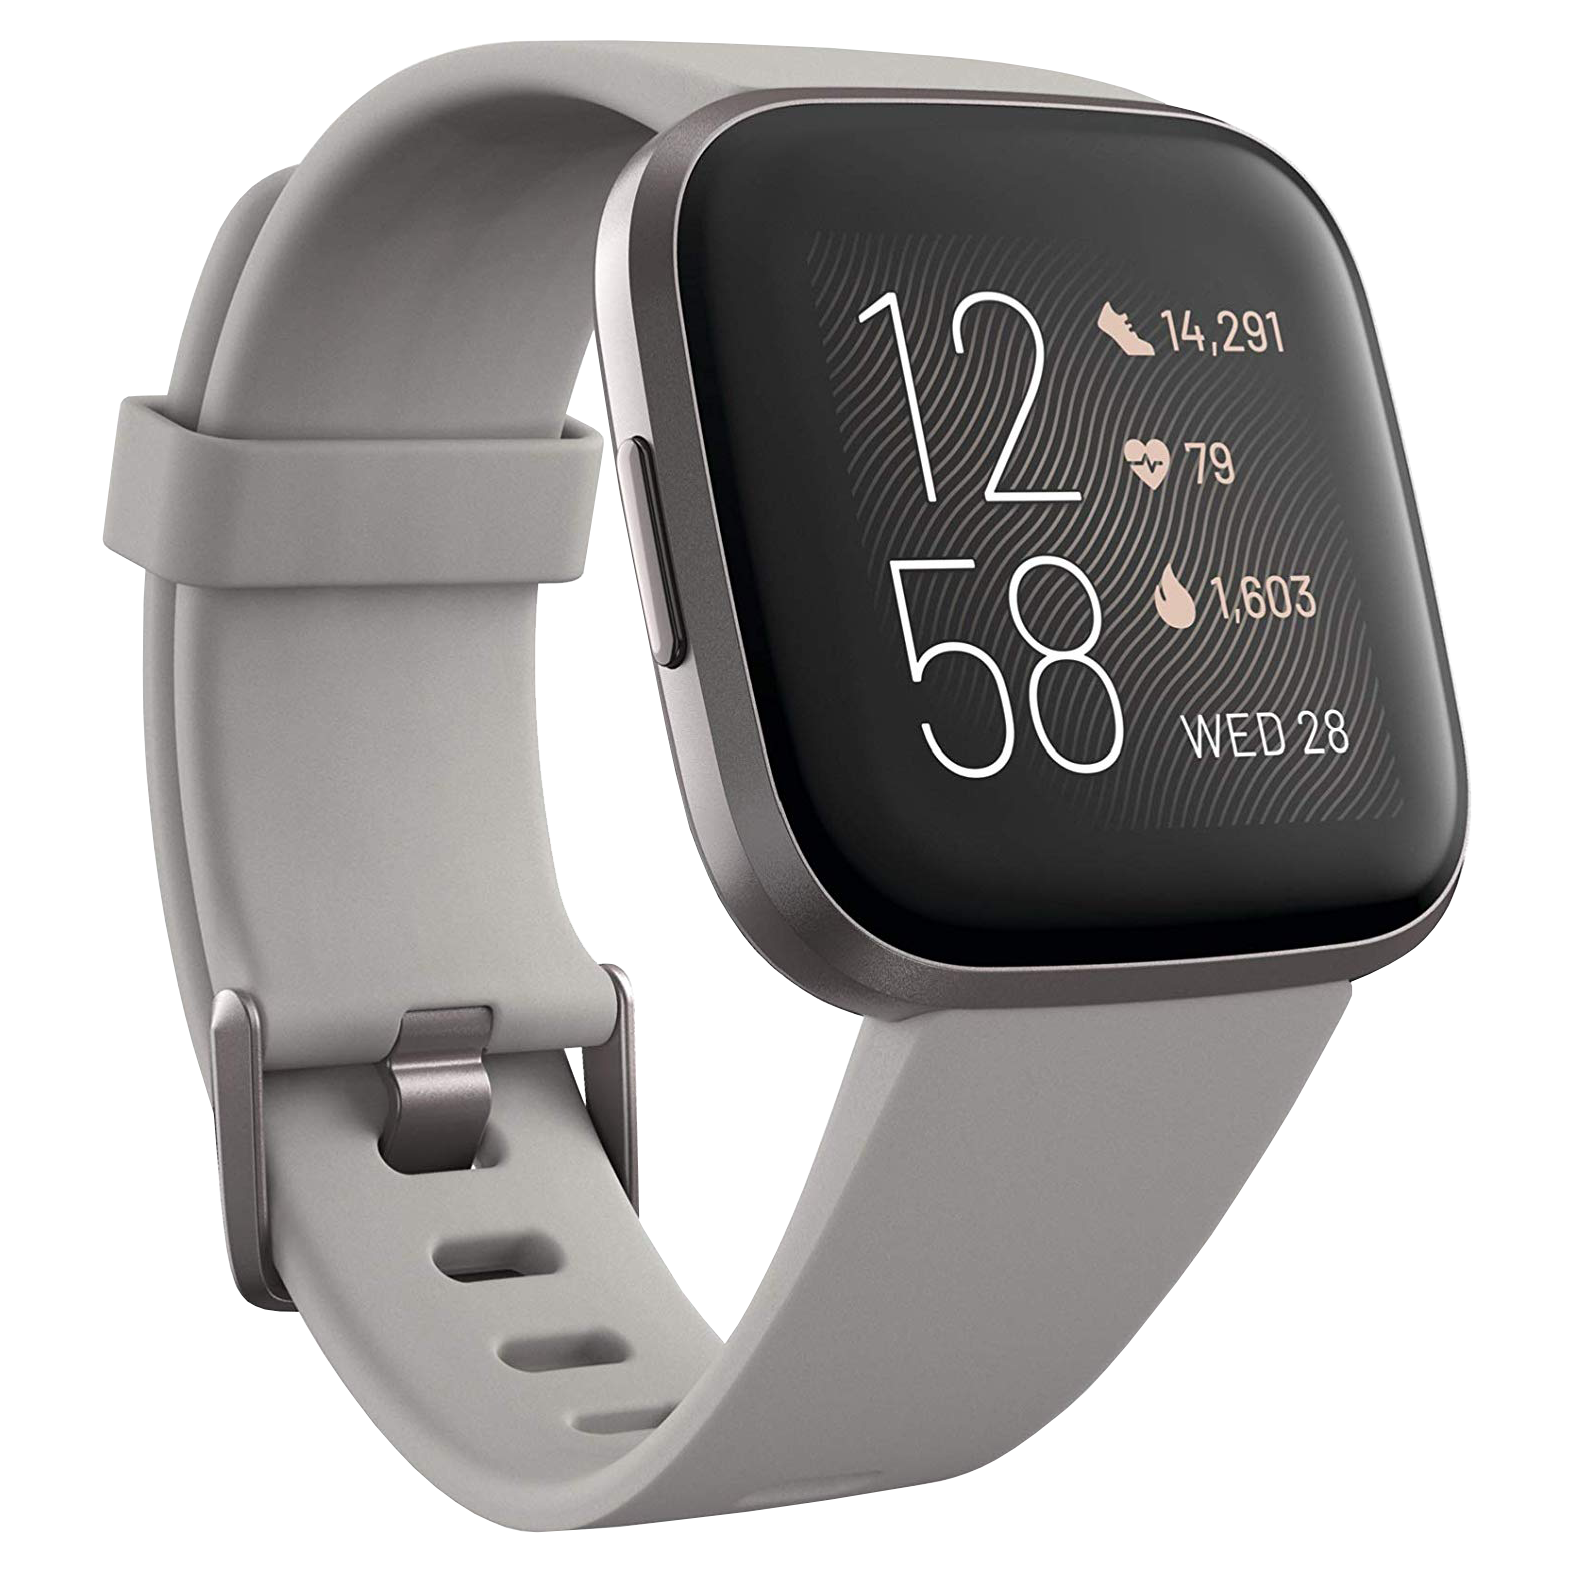 fitbit for samsung galaxy s8